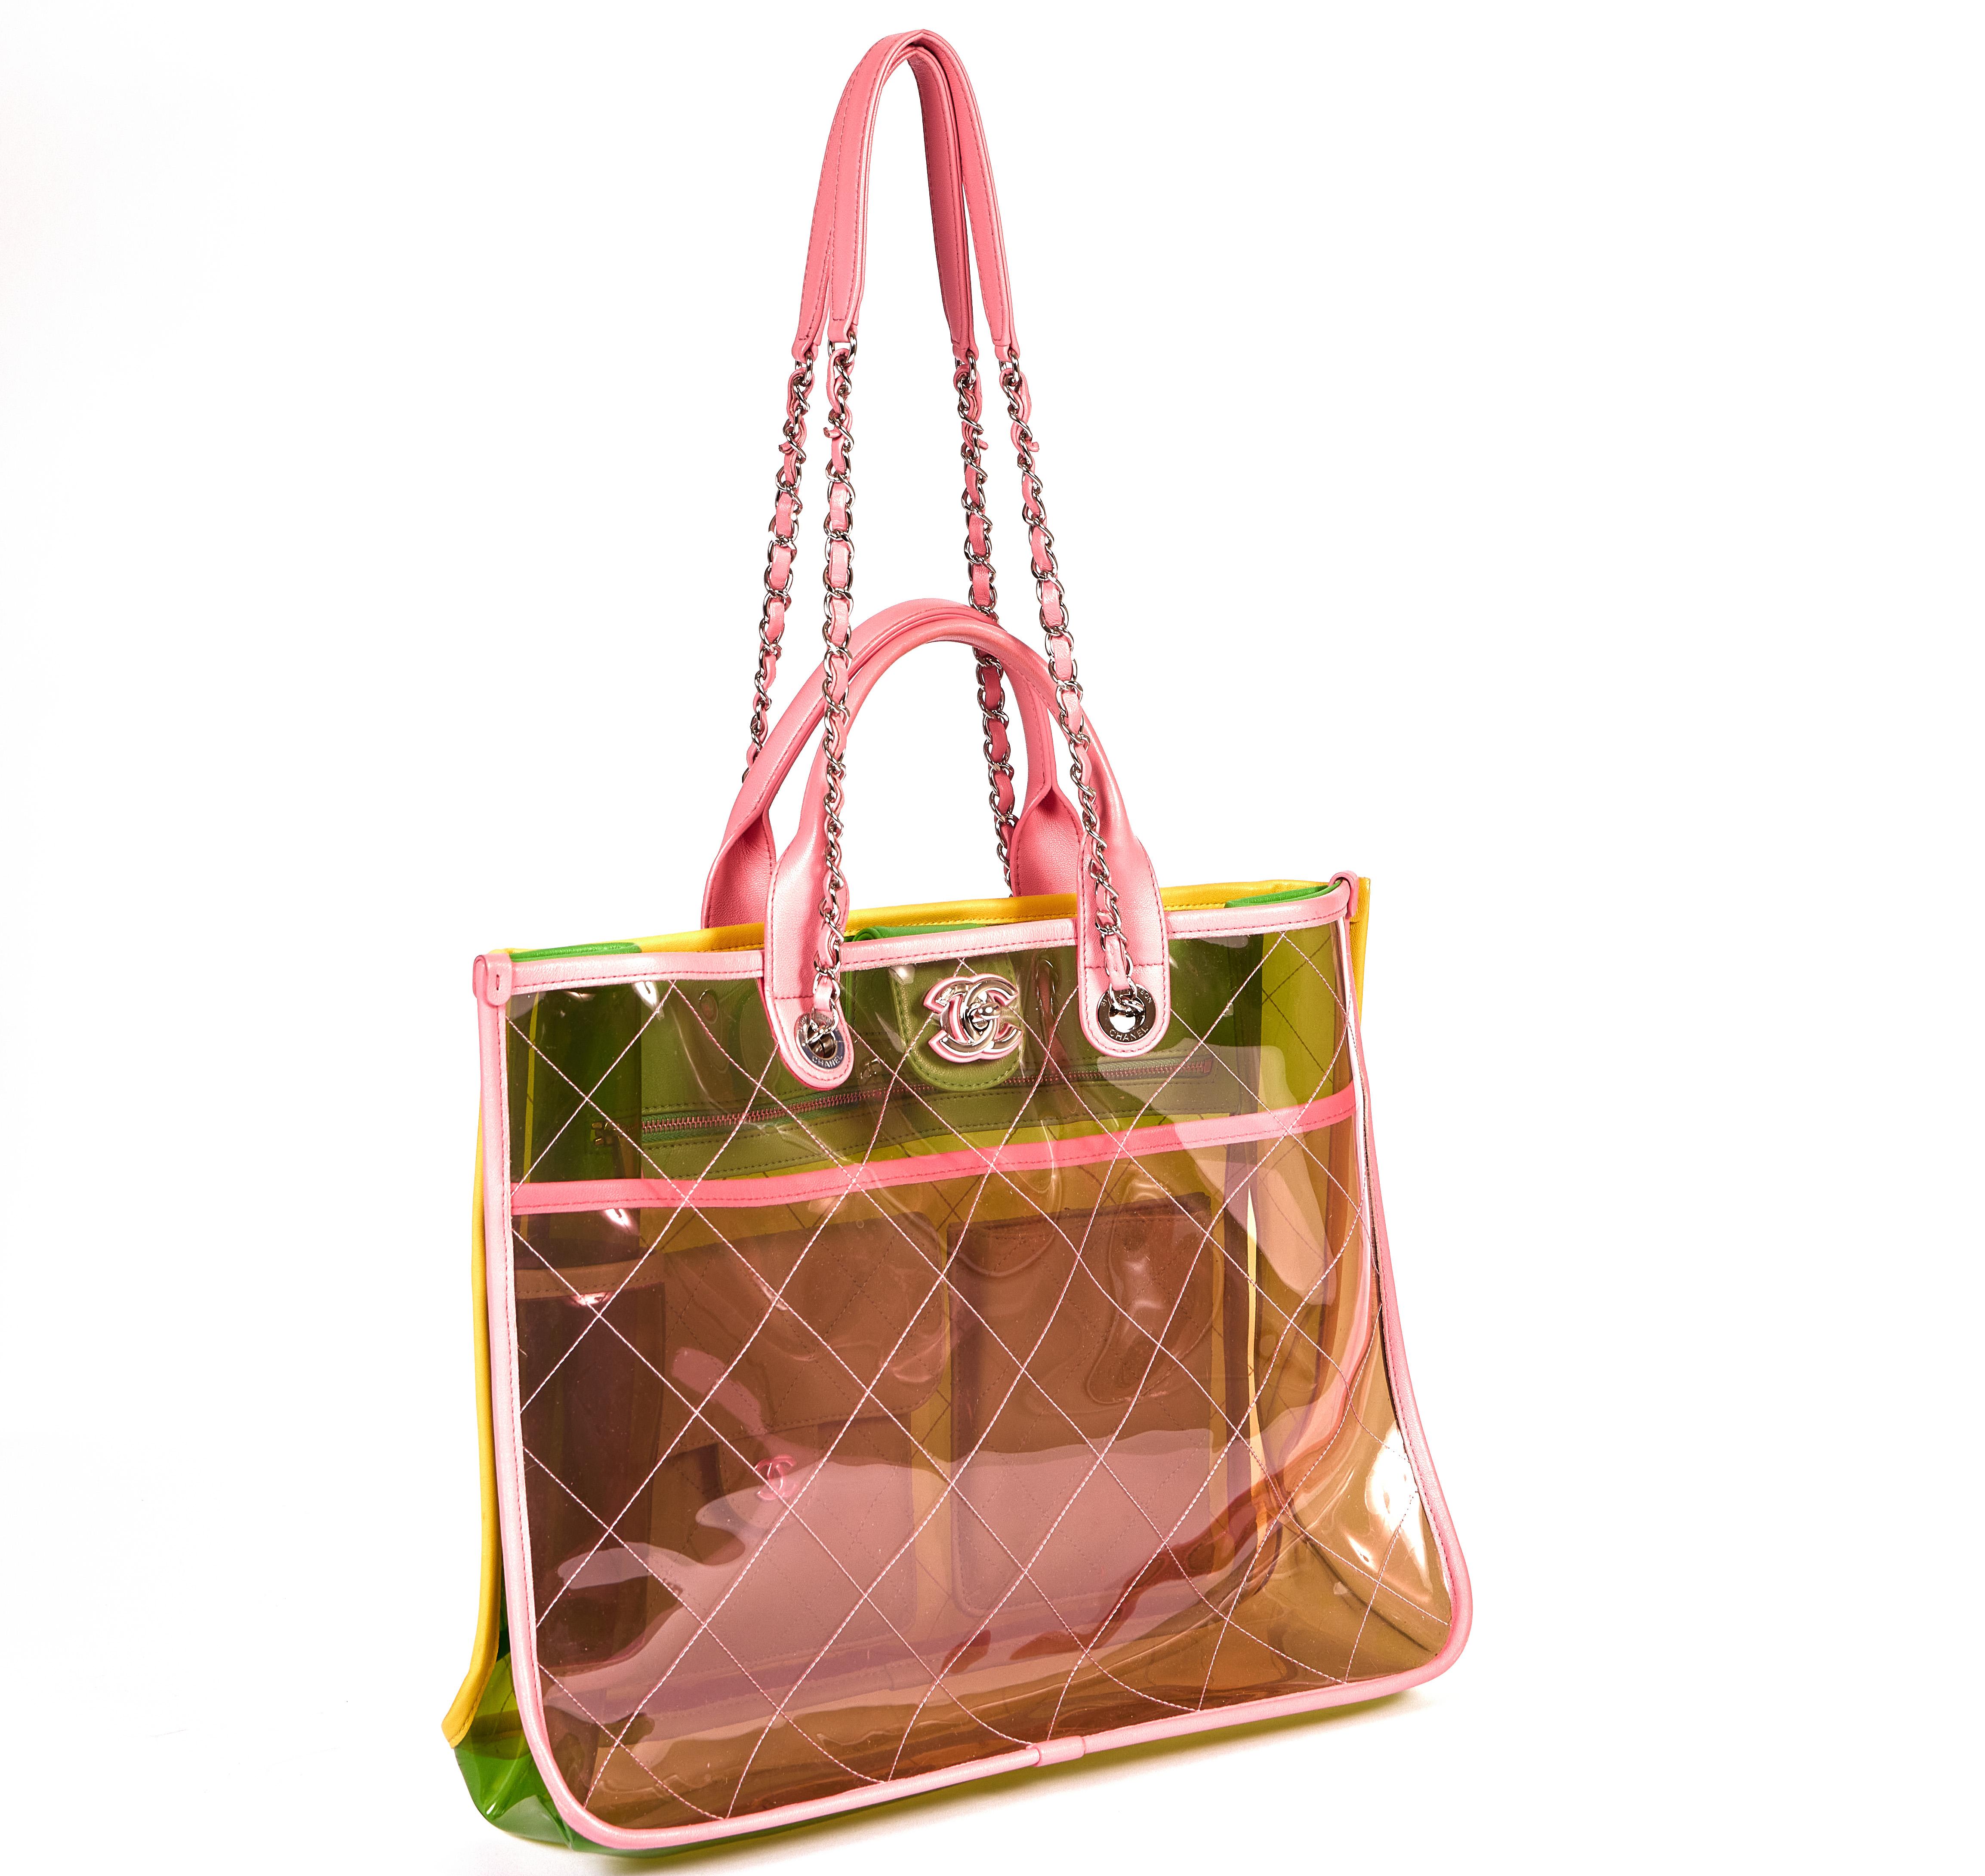 This large transparent PVC Chanel Coco is trimmed in leather lambskin and comes with two short toting handles as well as two long chain and leather straps. The bag is pink, green and yellow and an absolute must have for the summer. It comes with the